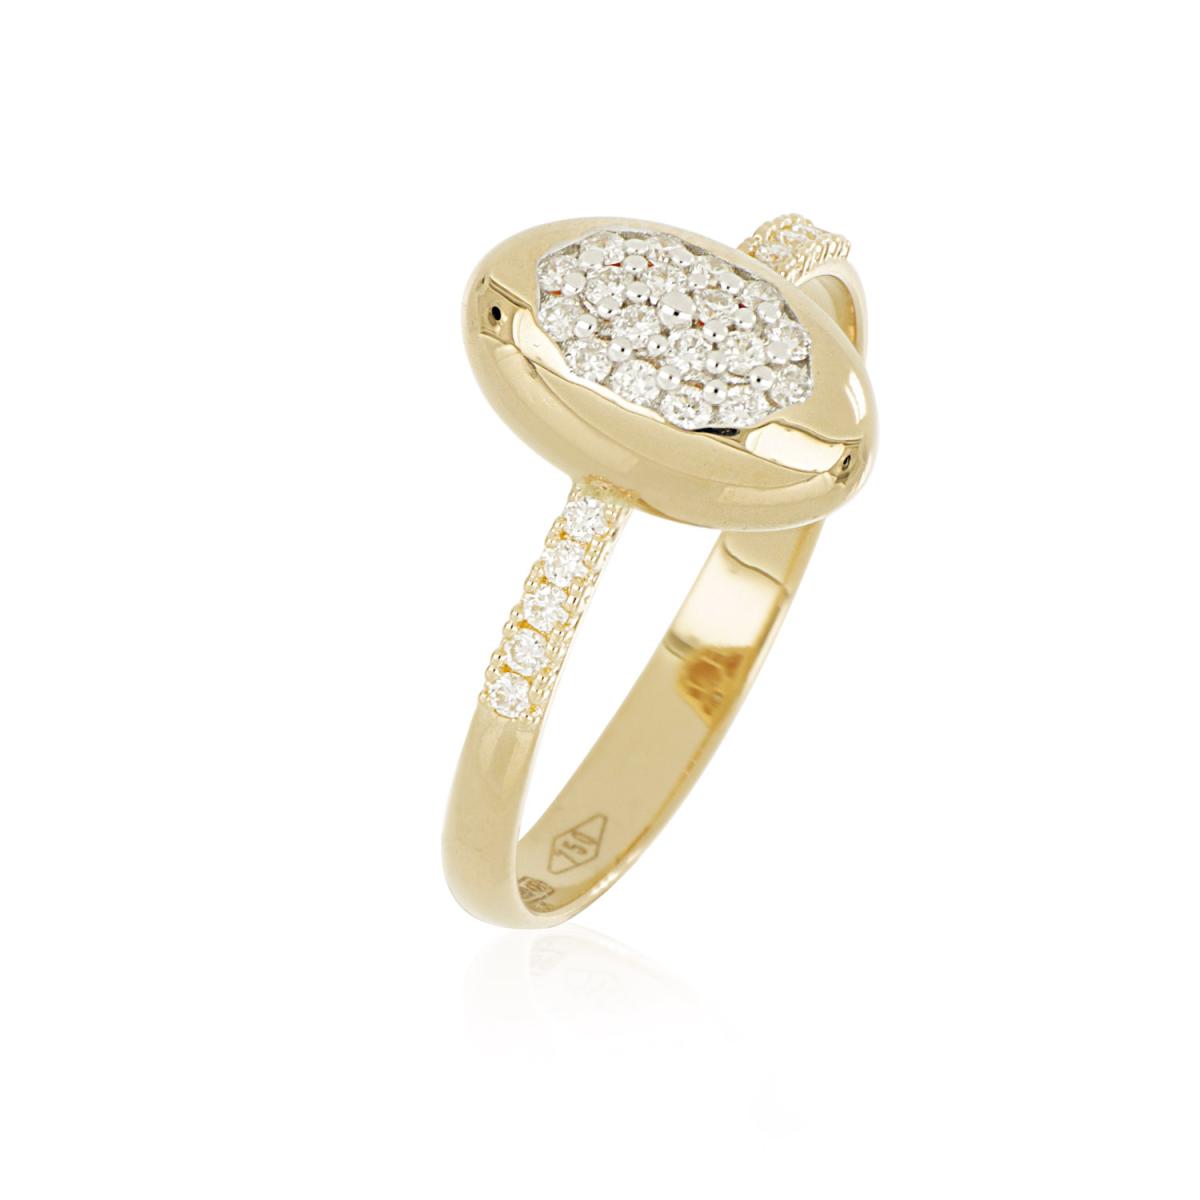 Oval ring in gold and diamonds - AD977